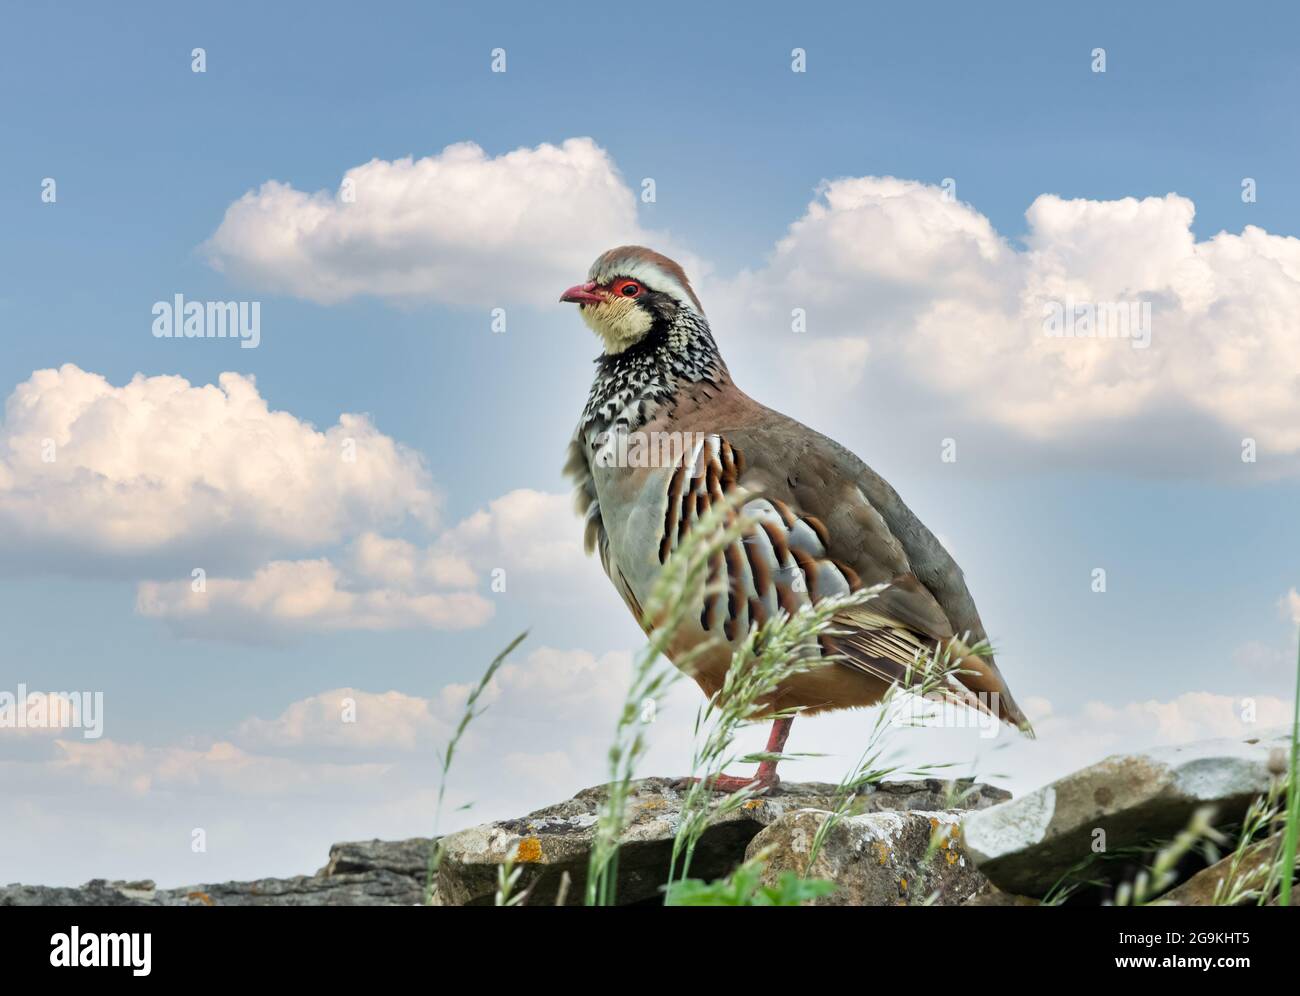 Close up of a Red-legged or French partridge standing on a drystone wall surrounded by grasses and facing left.  Scientific name: Alectoris rufa.  Bac Stock Photo